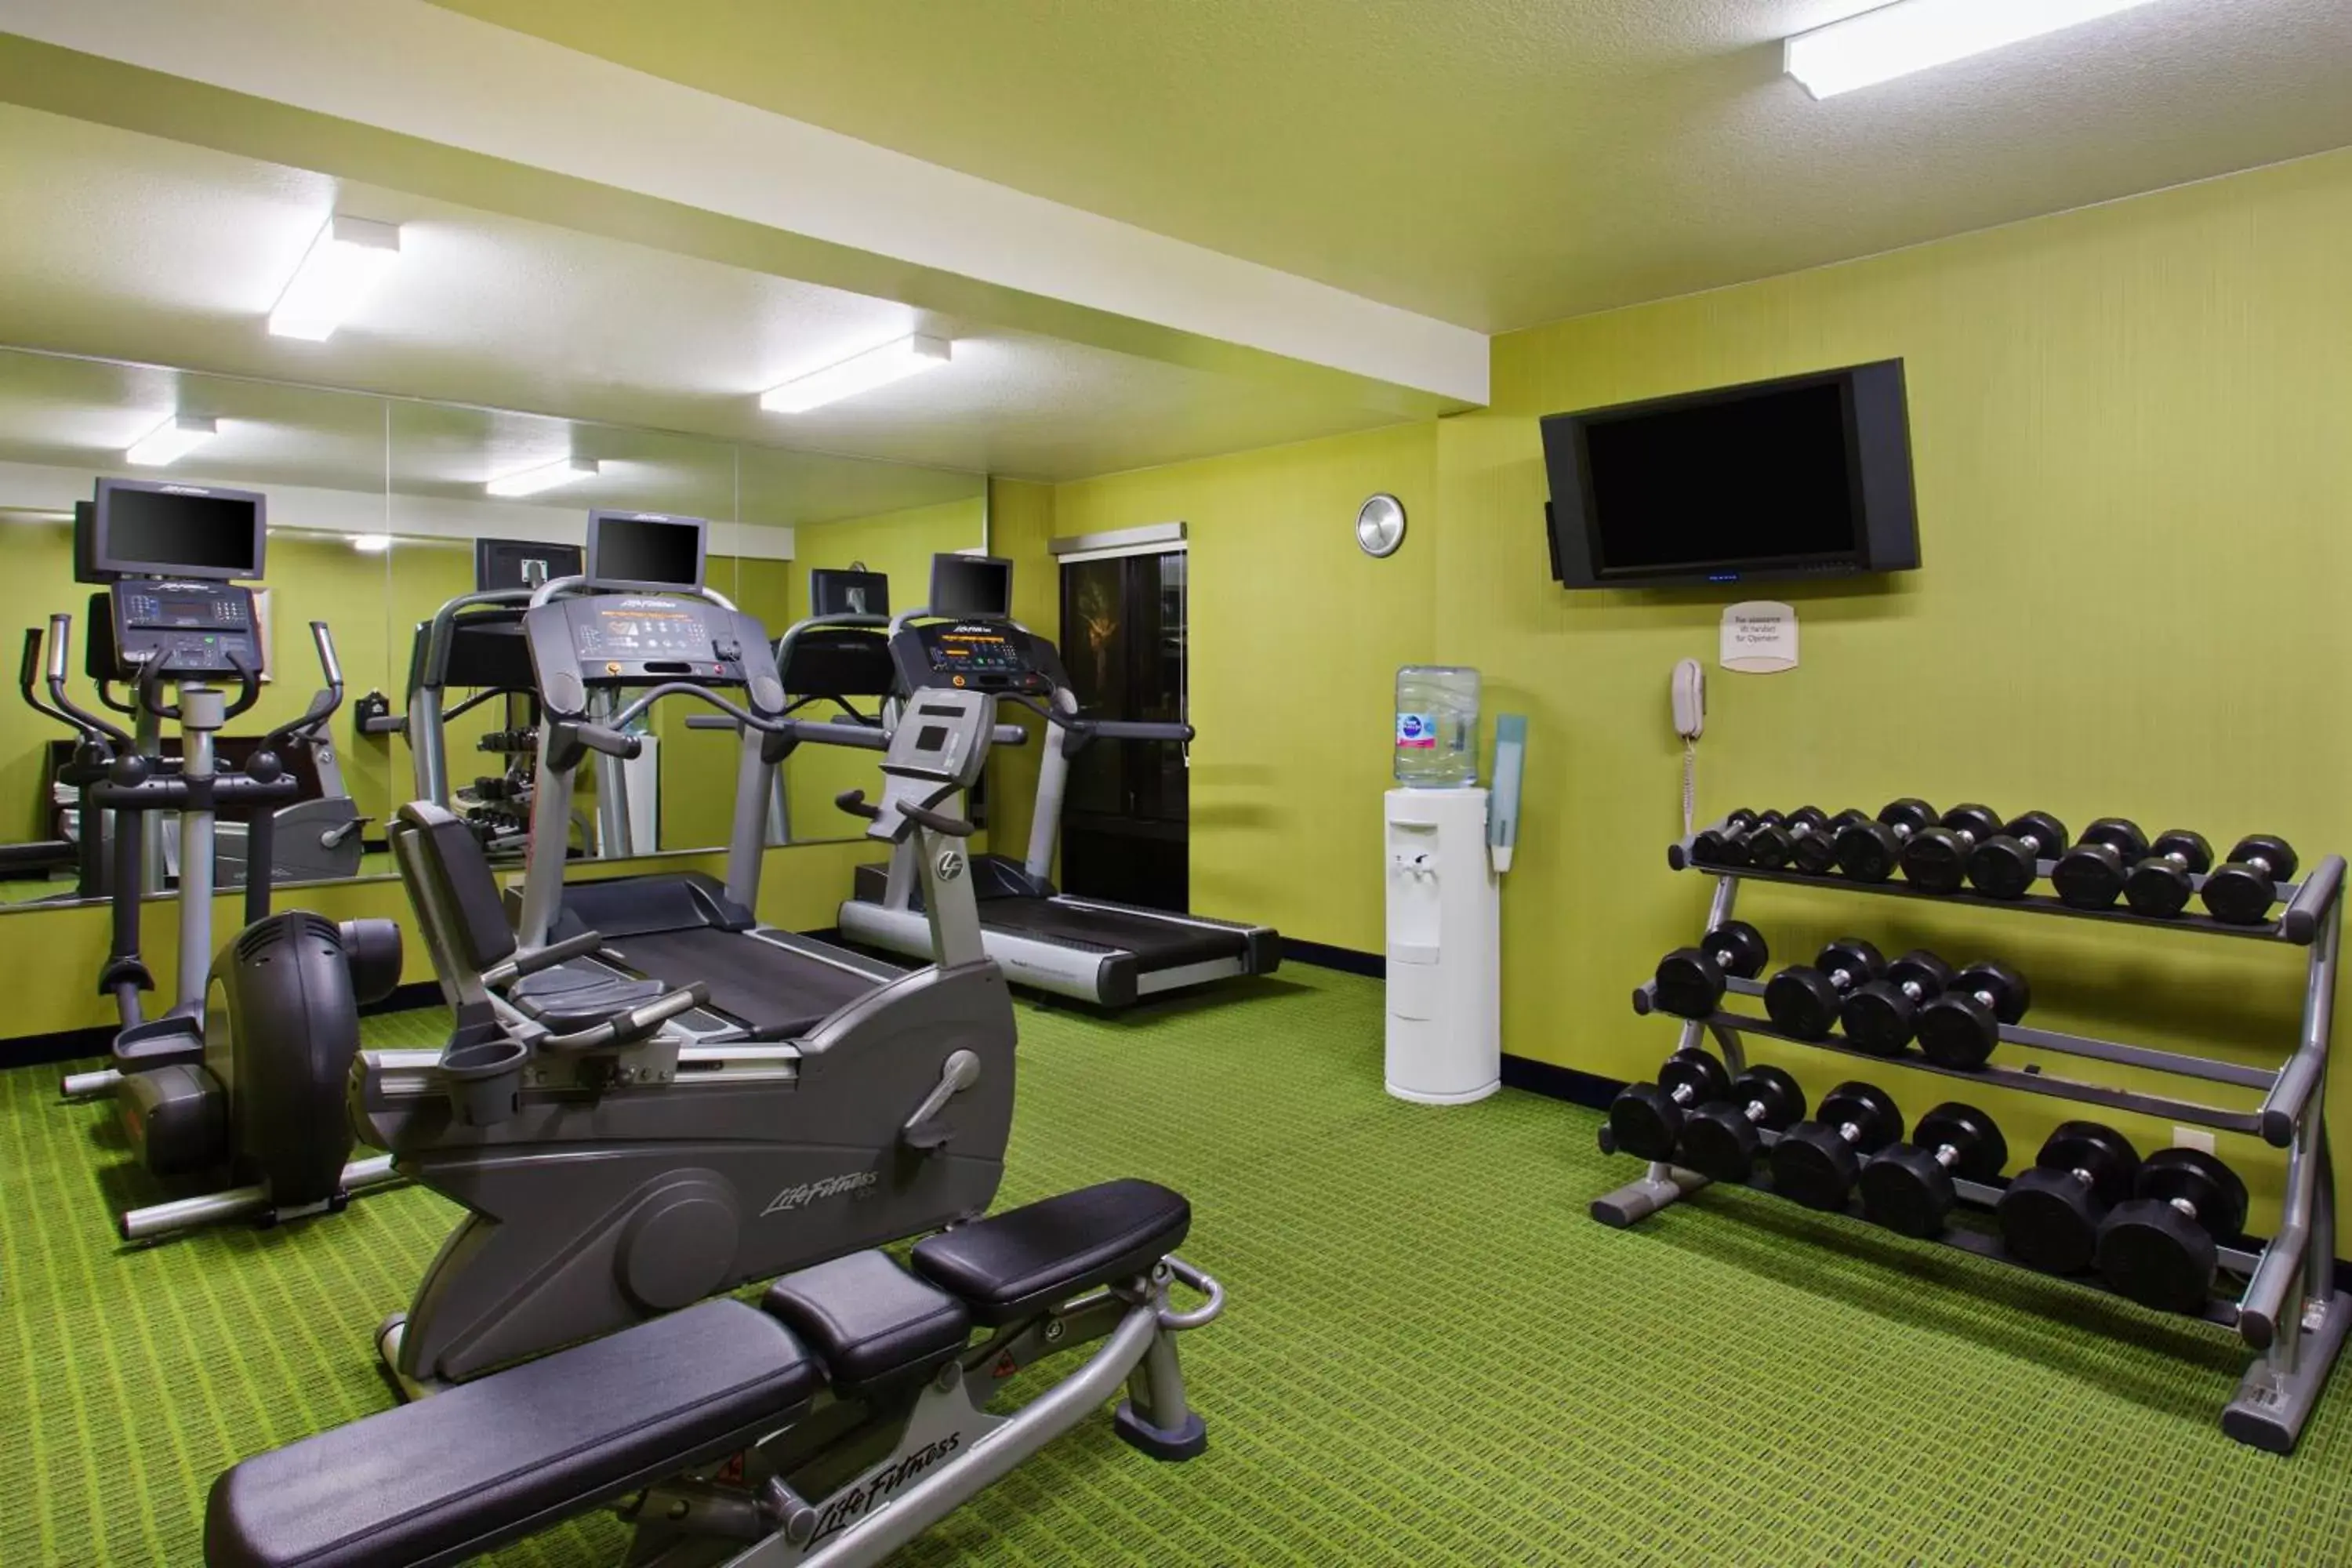 Fitness centre/facilities, Fitness Center/Facilities in Fairfield Mission Viejo Orange County